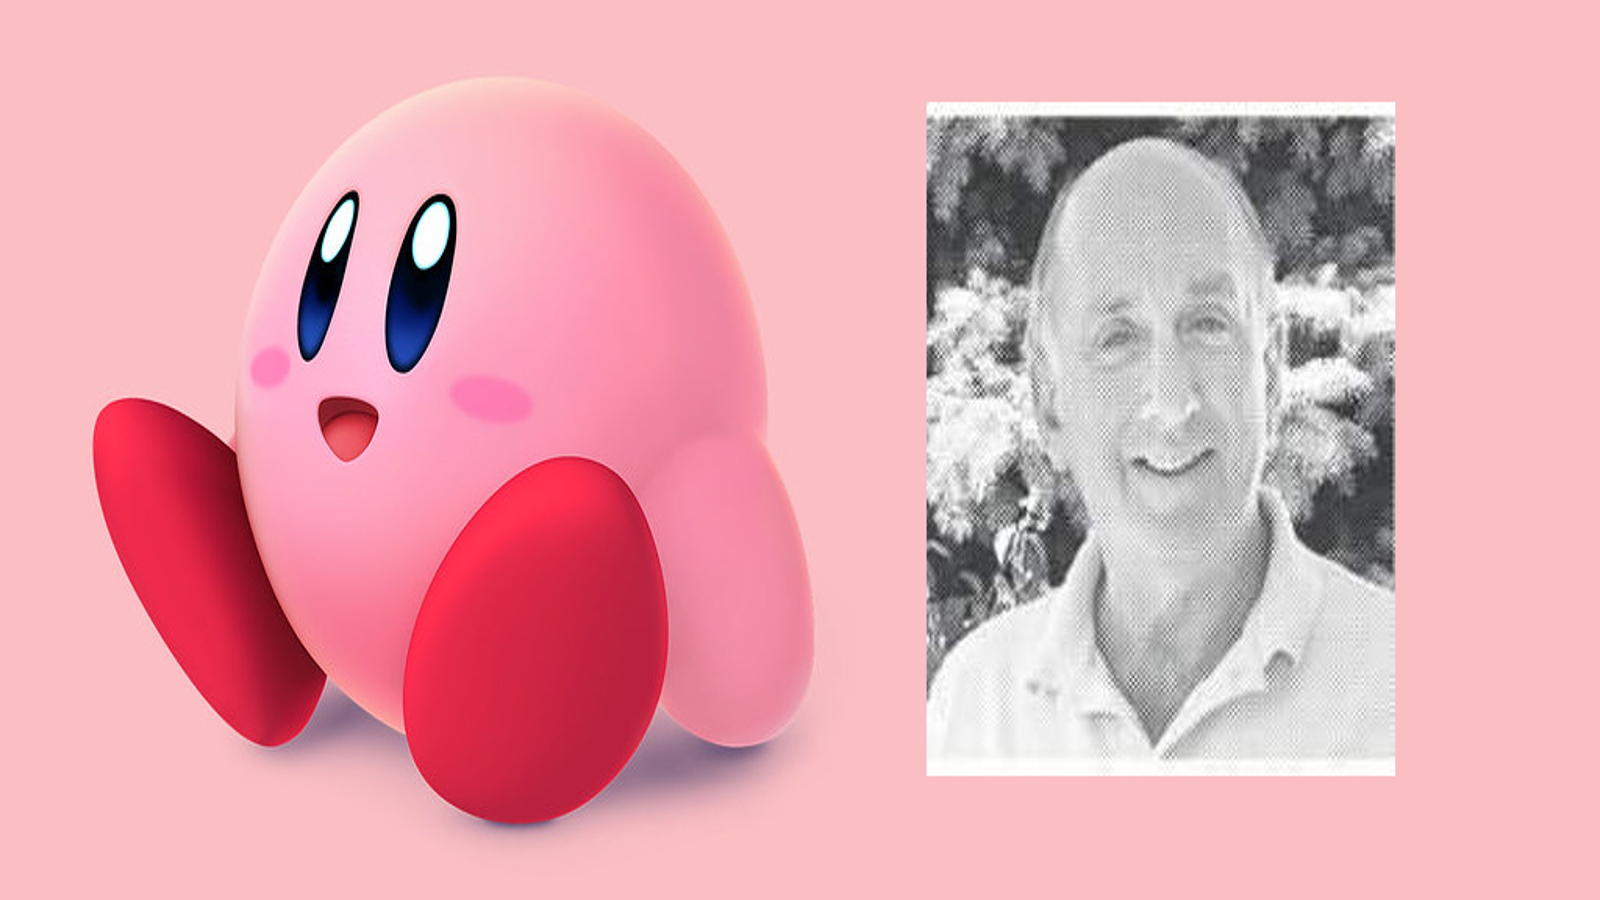 Character Profile - Kirby